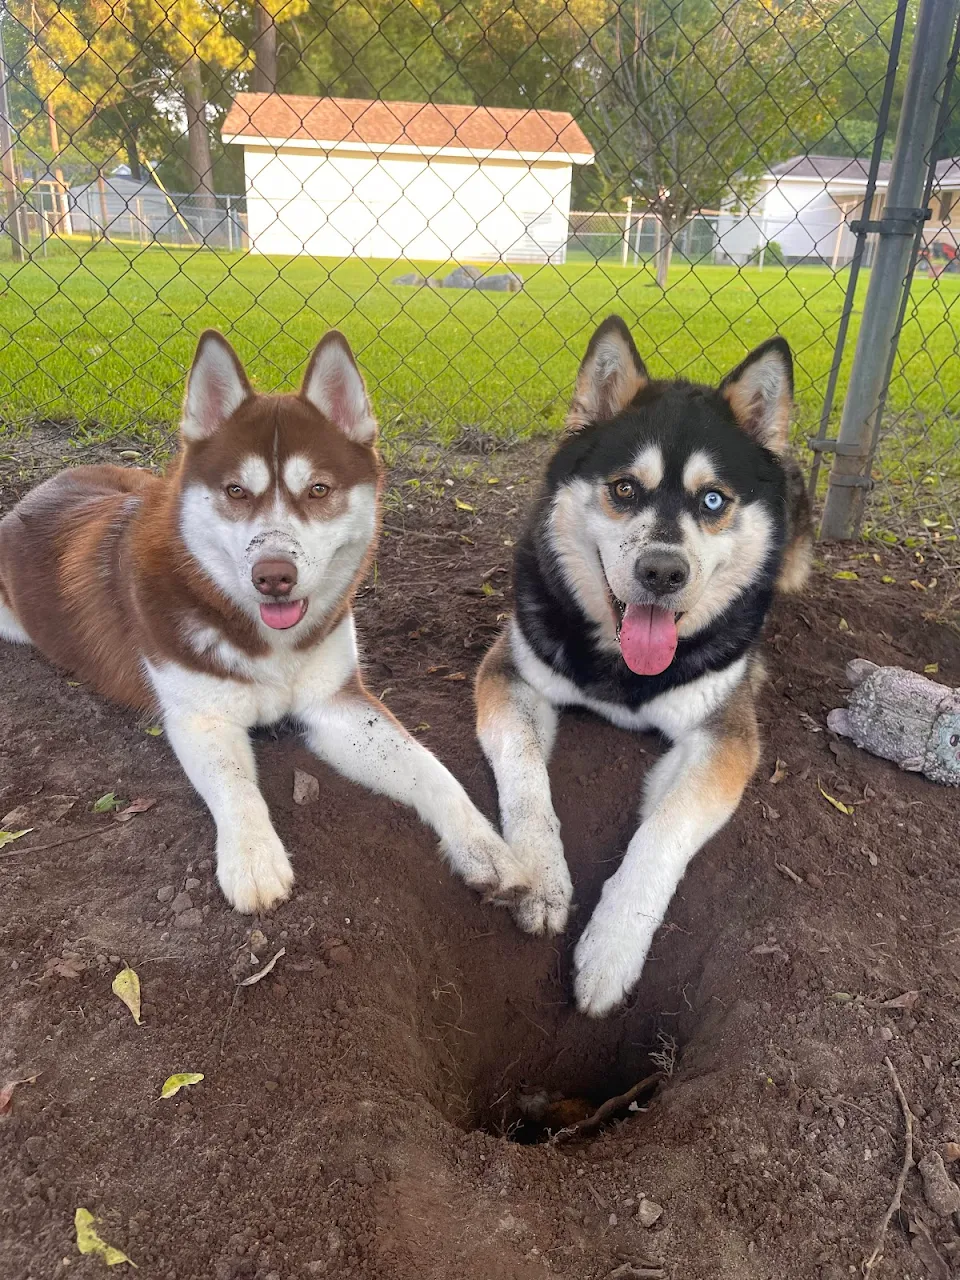 Digging?… no.. we would never..